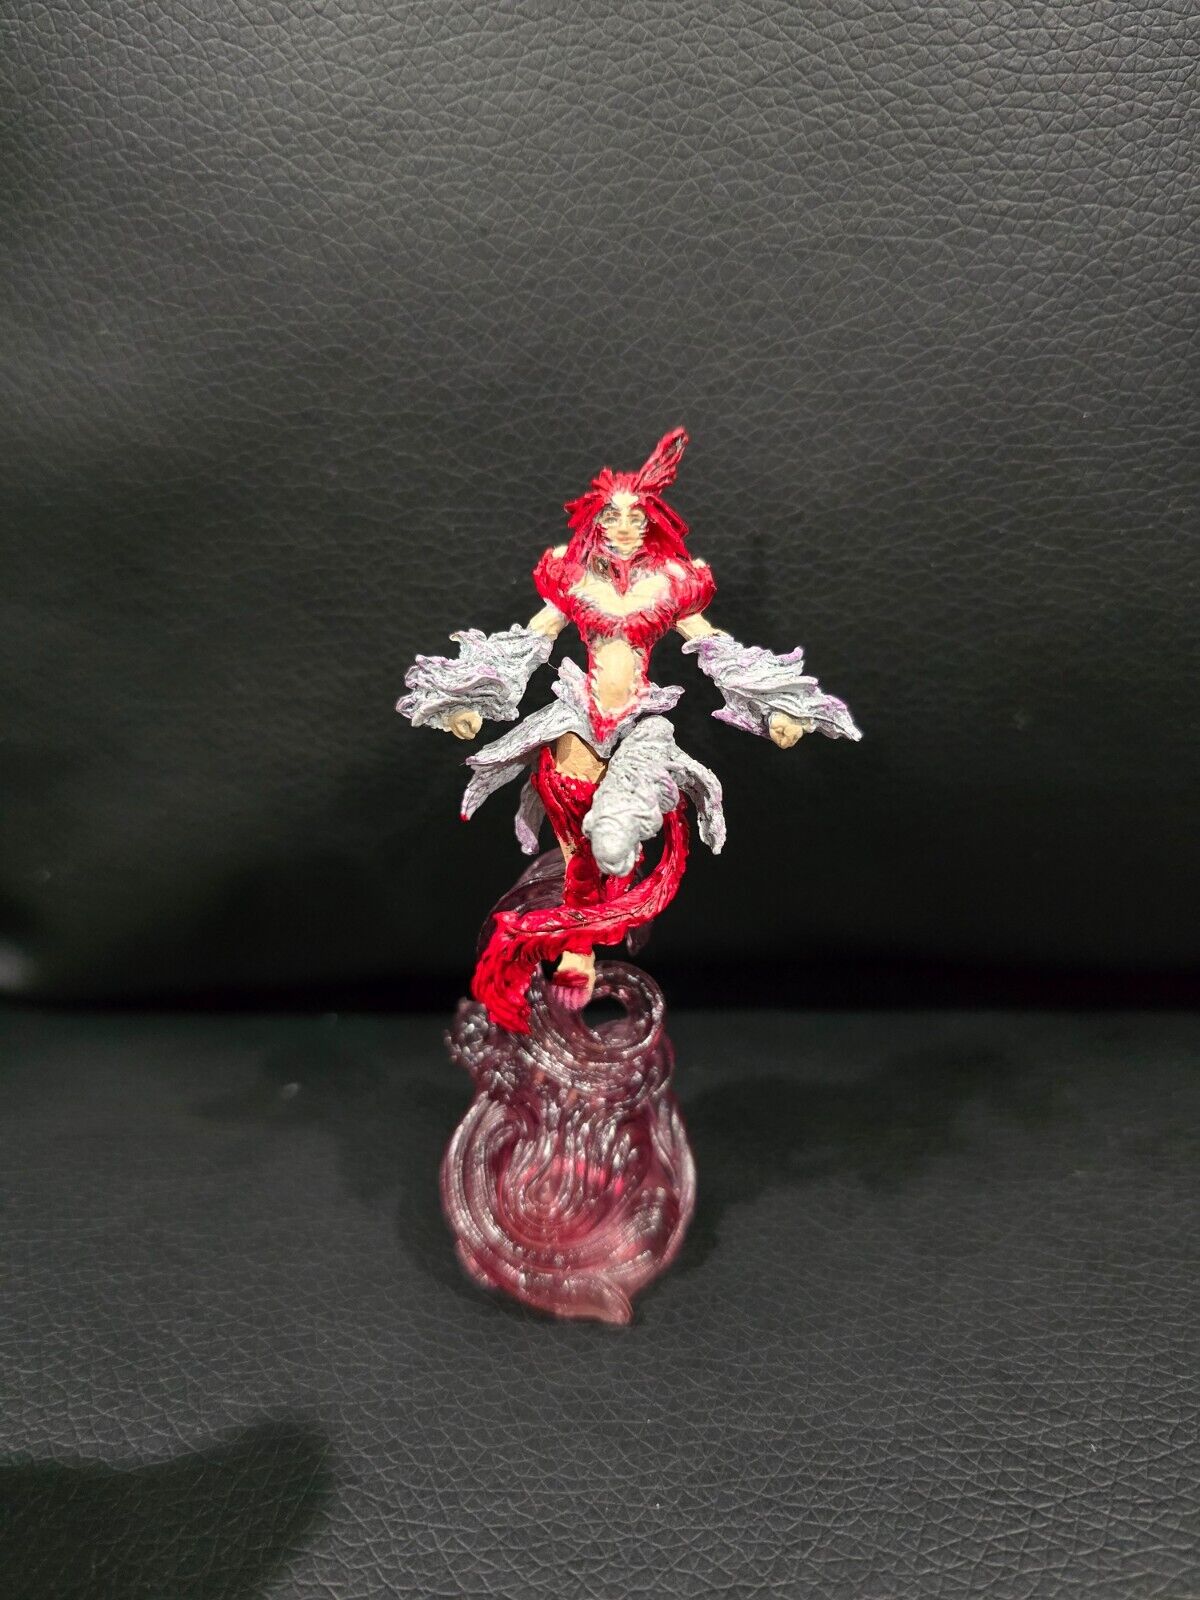 Final Fantasy Creatures Vol 4 Trance Kuja figure with Card Square Enix